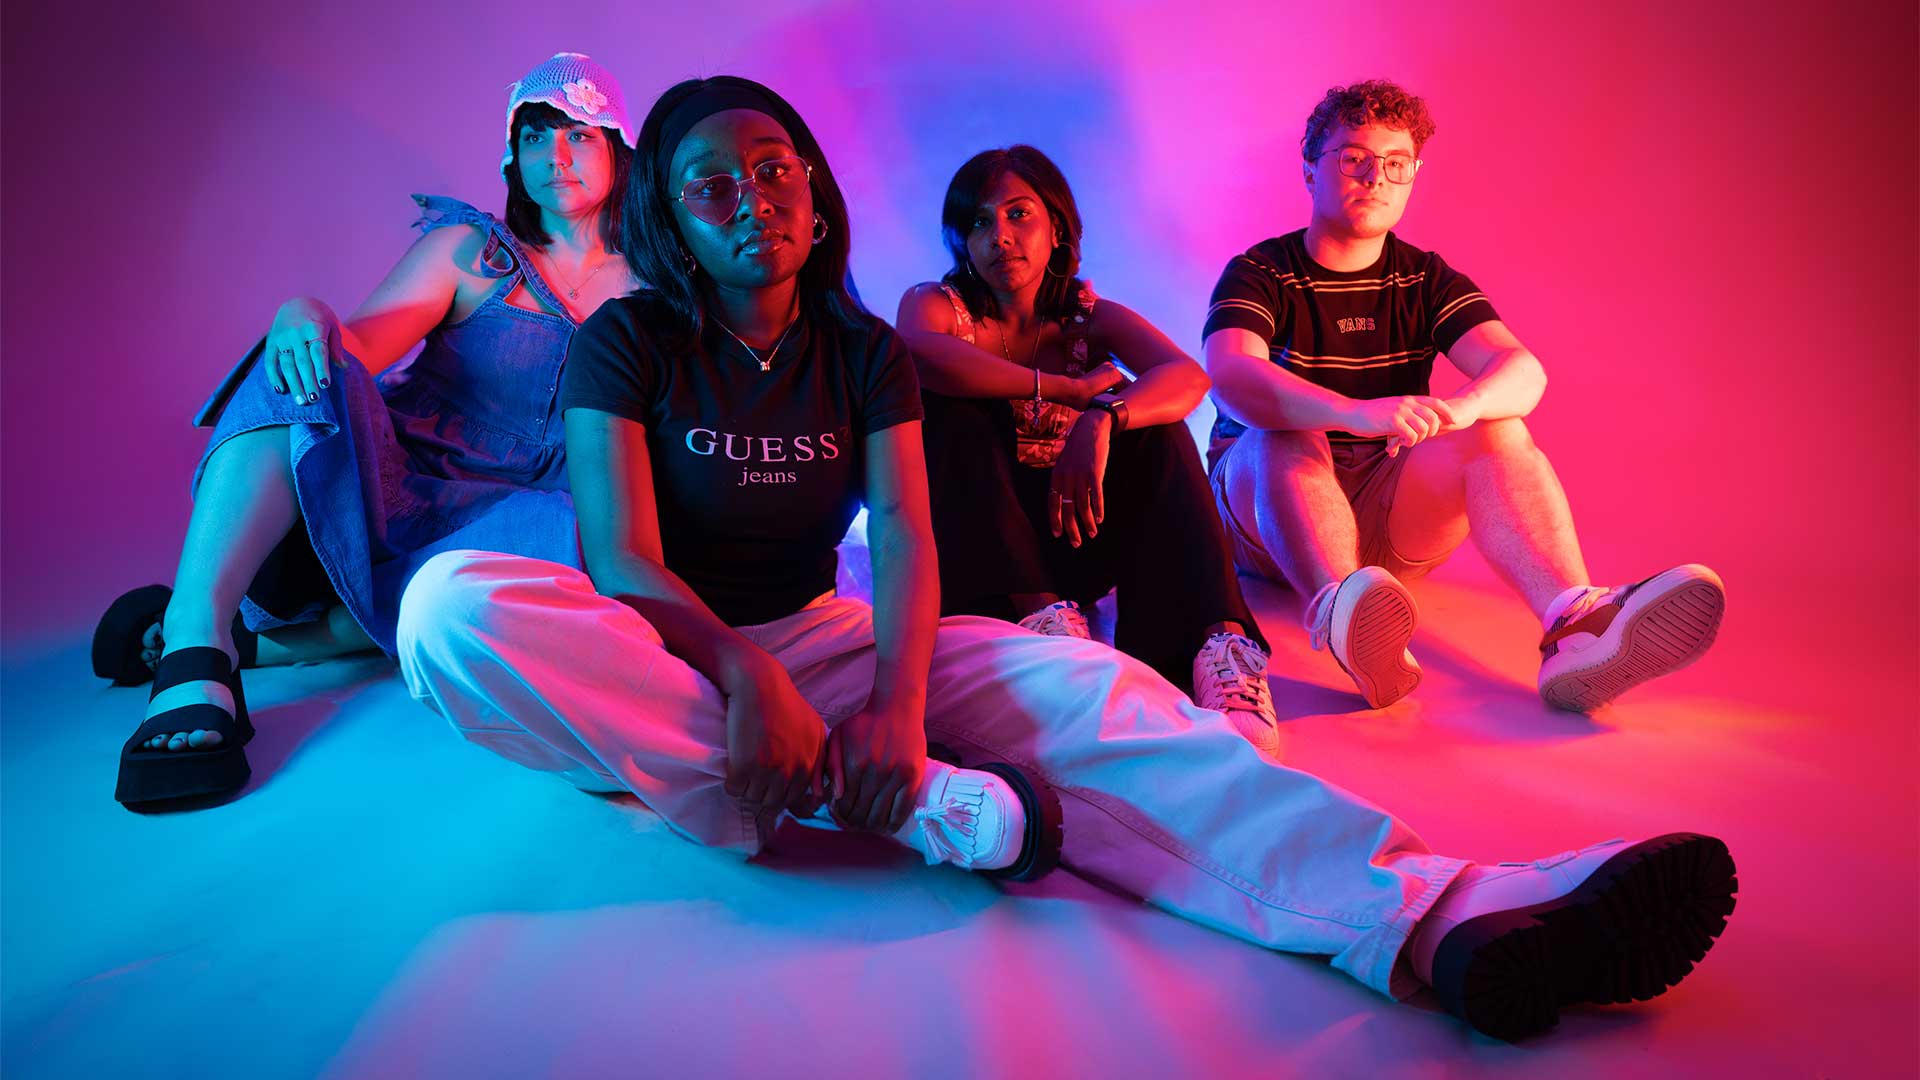 Four students sat on the floor in a photography studio, light up by neon pink and purple lights